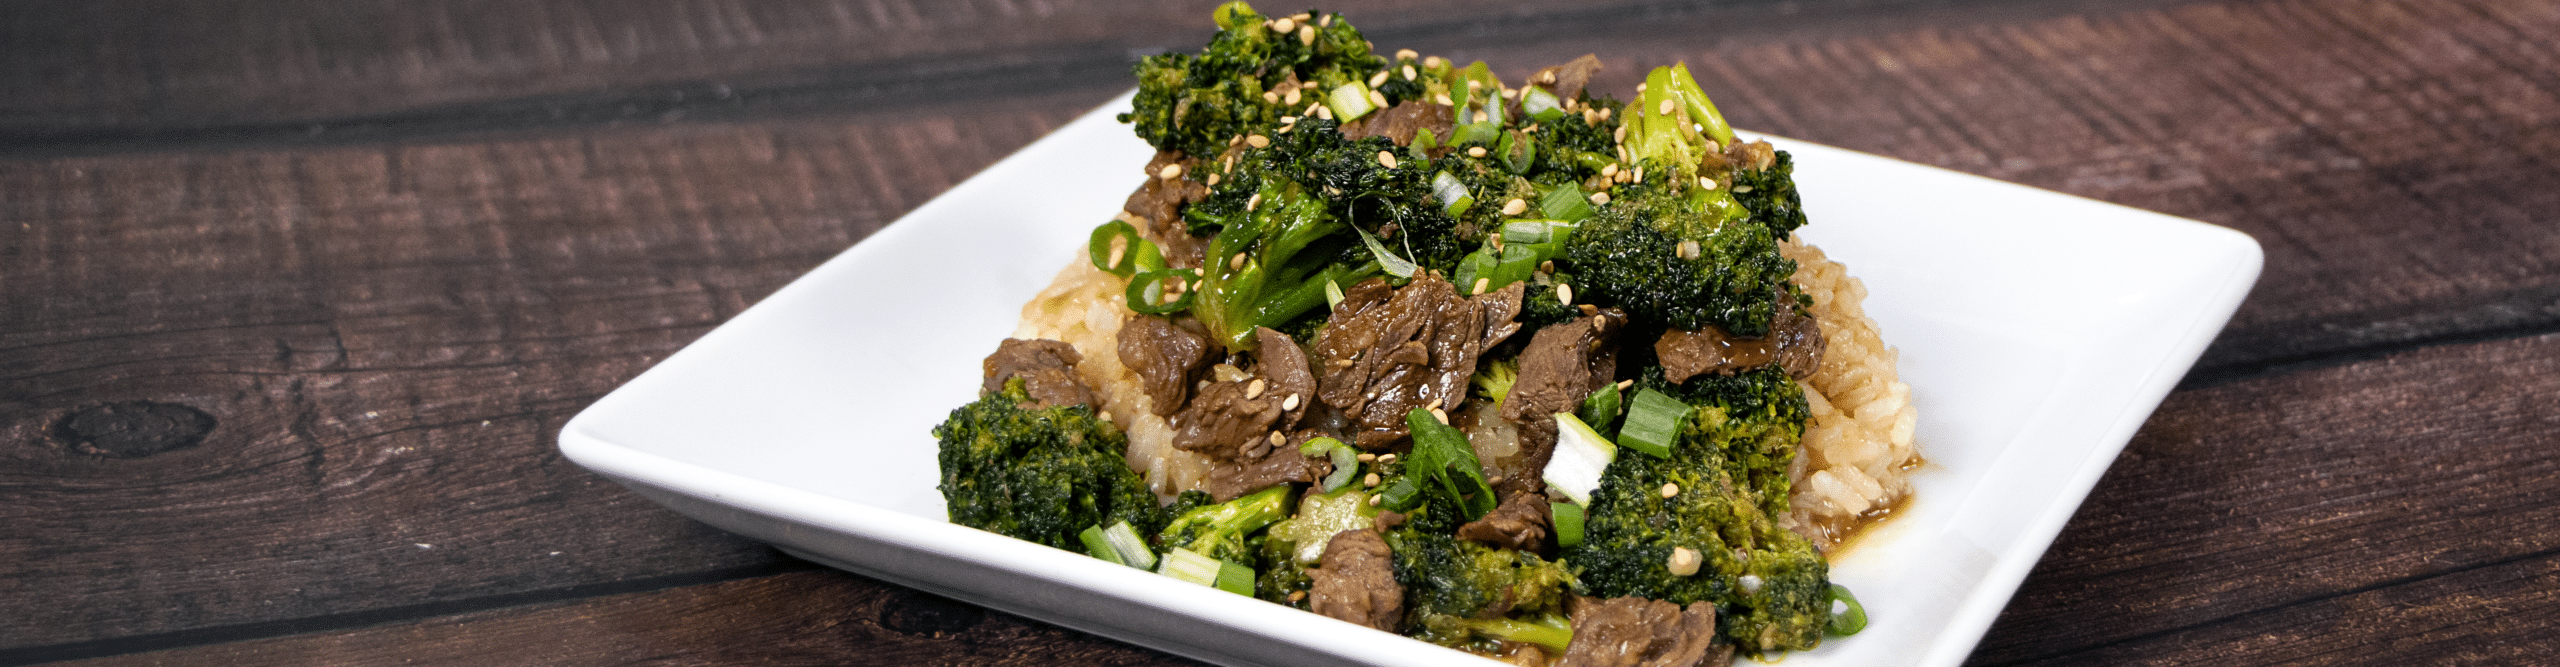 gluten free dairy free beef and broccoli full 01